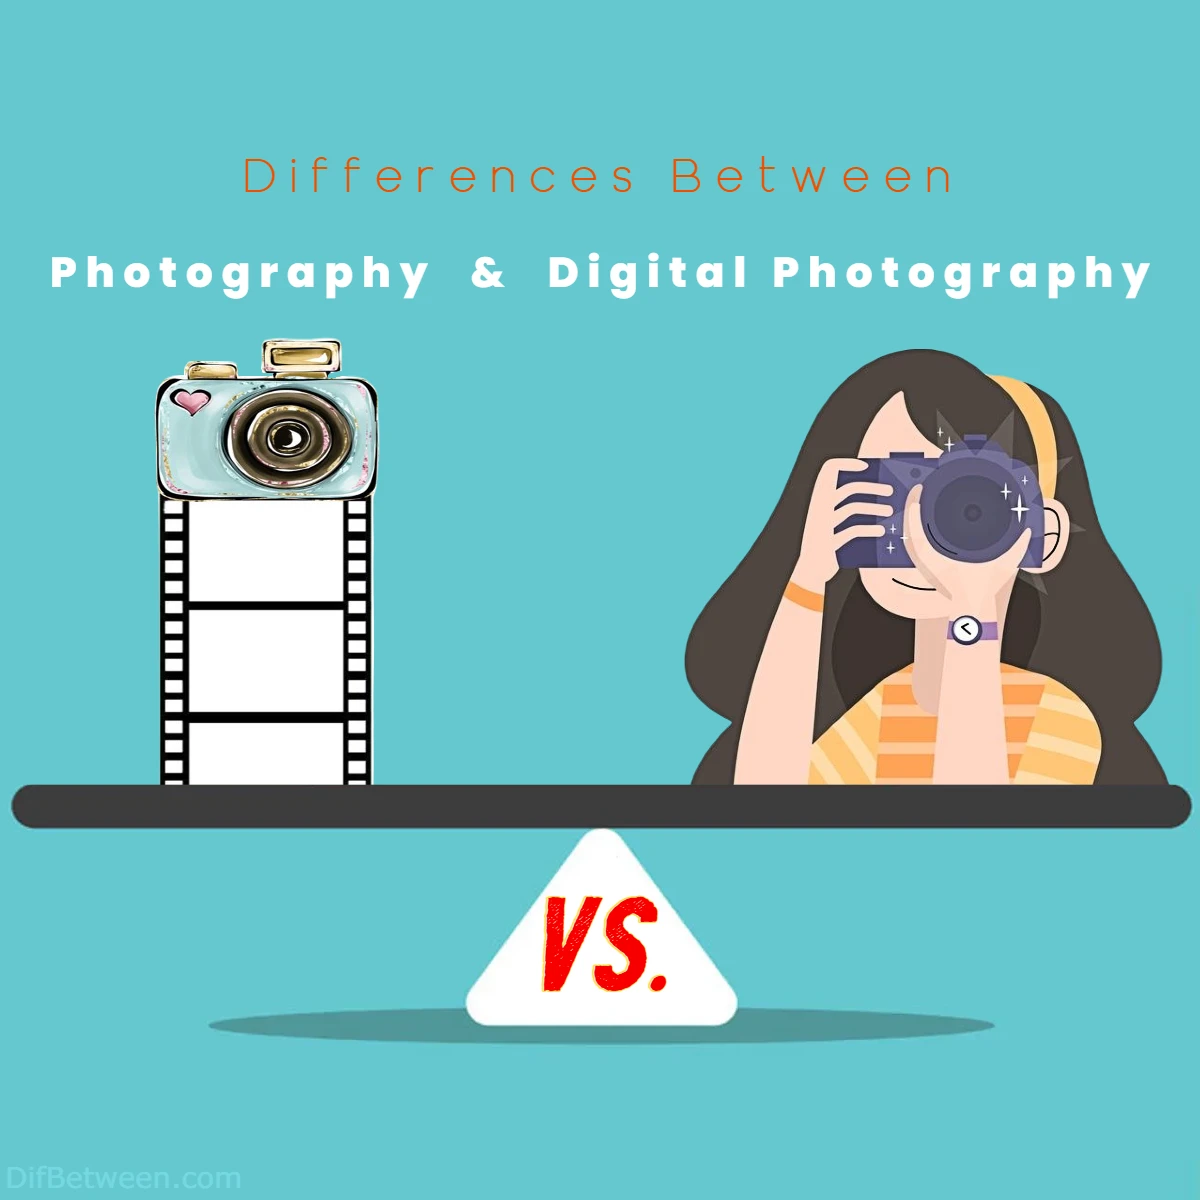 Differences Between Photography vs Digital Photography